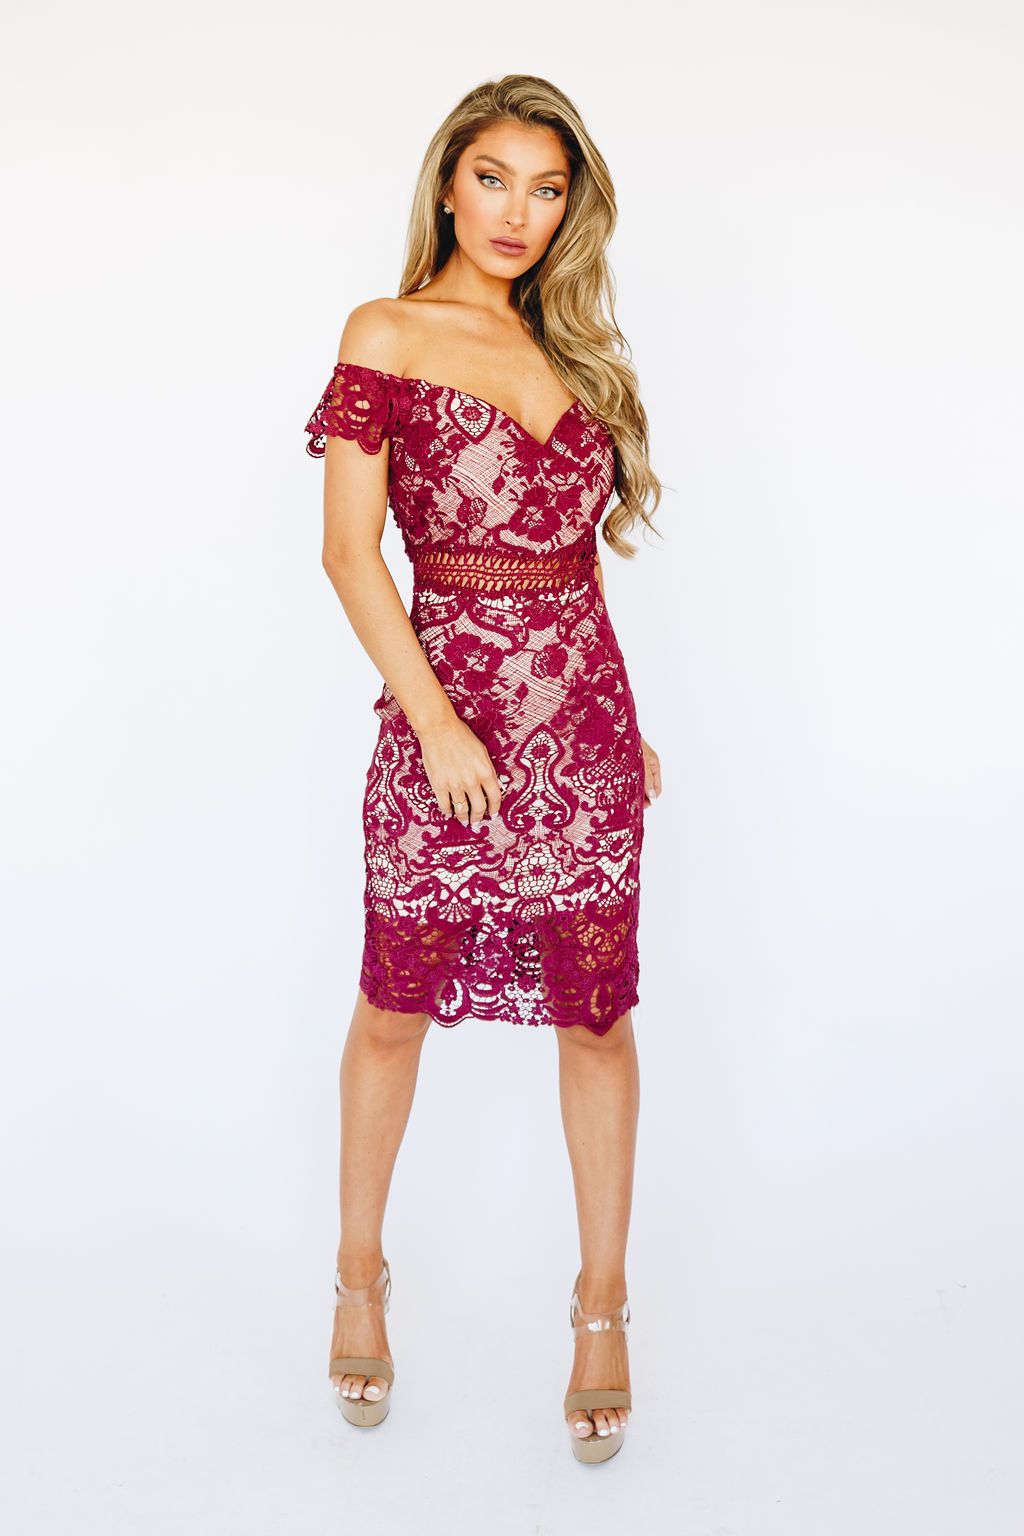 Style D16609-3 Soieblu Size 6 Off The Shoulder Lace Burgundy Red Cocktail Dress on Queenly